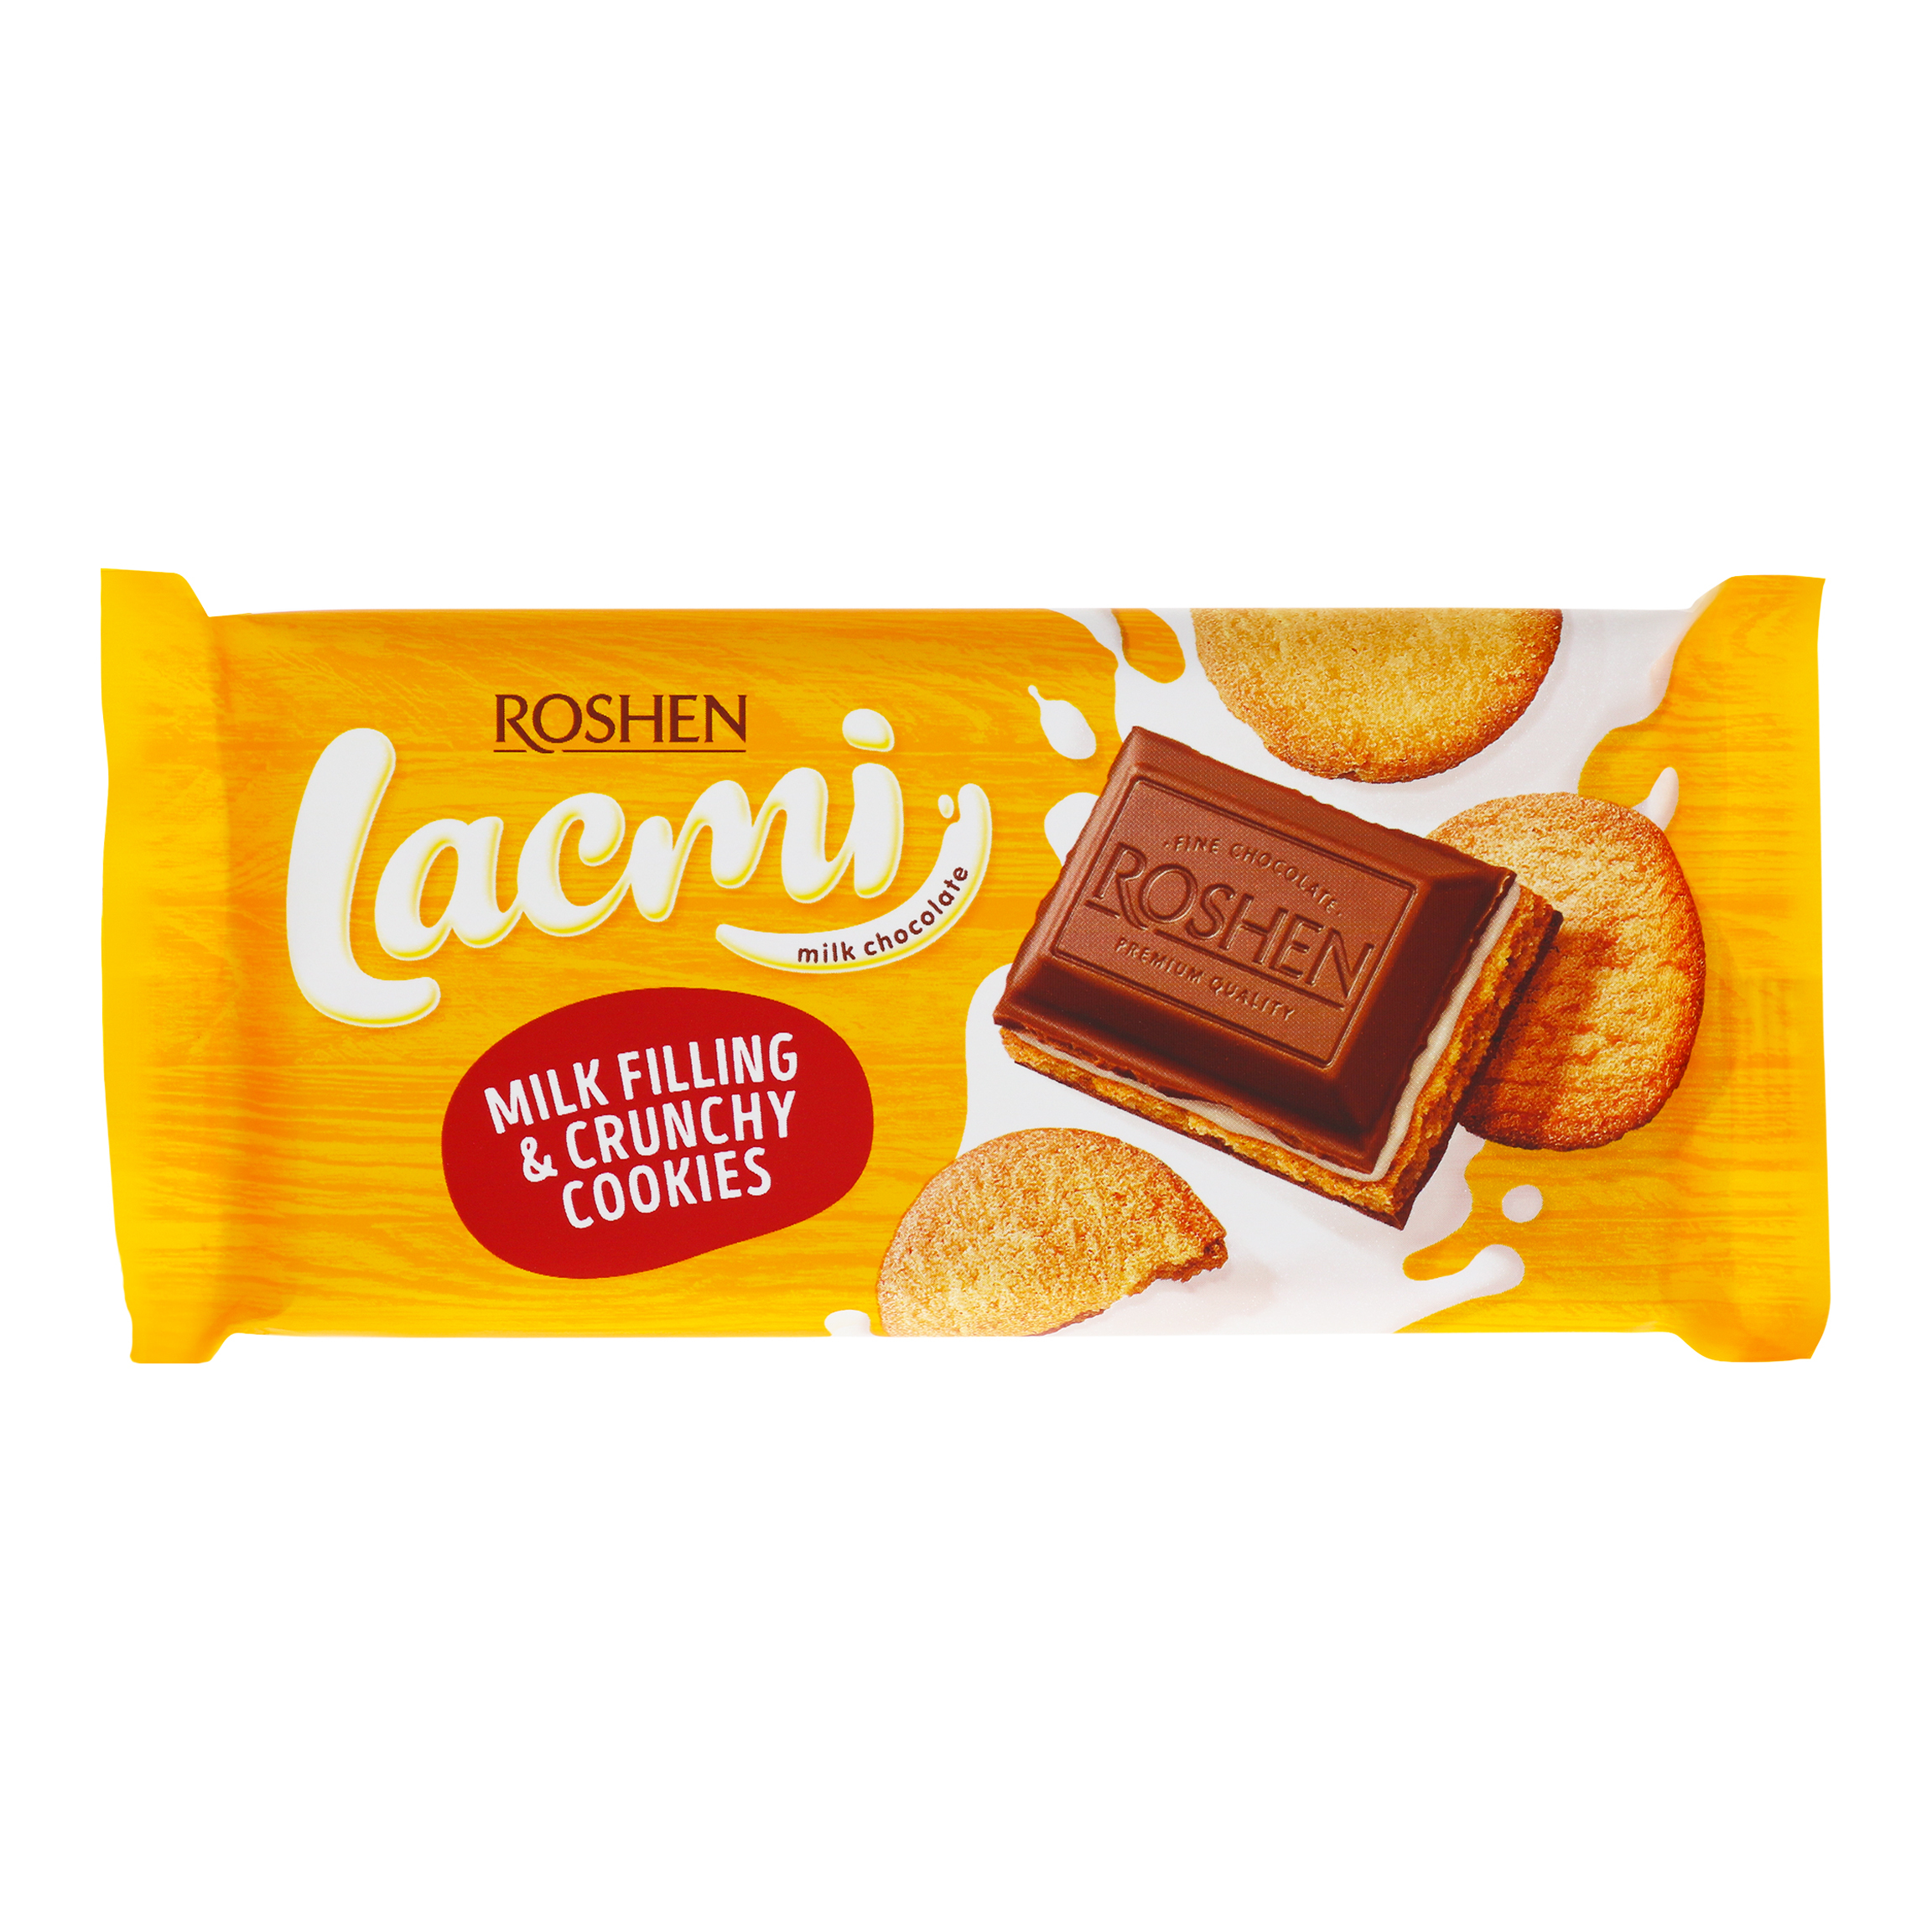 Roshen Lacmi Milk Chocolate with Milk Filling and Cookies 100g